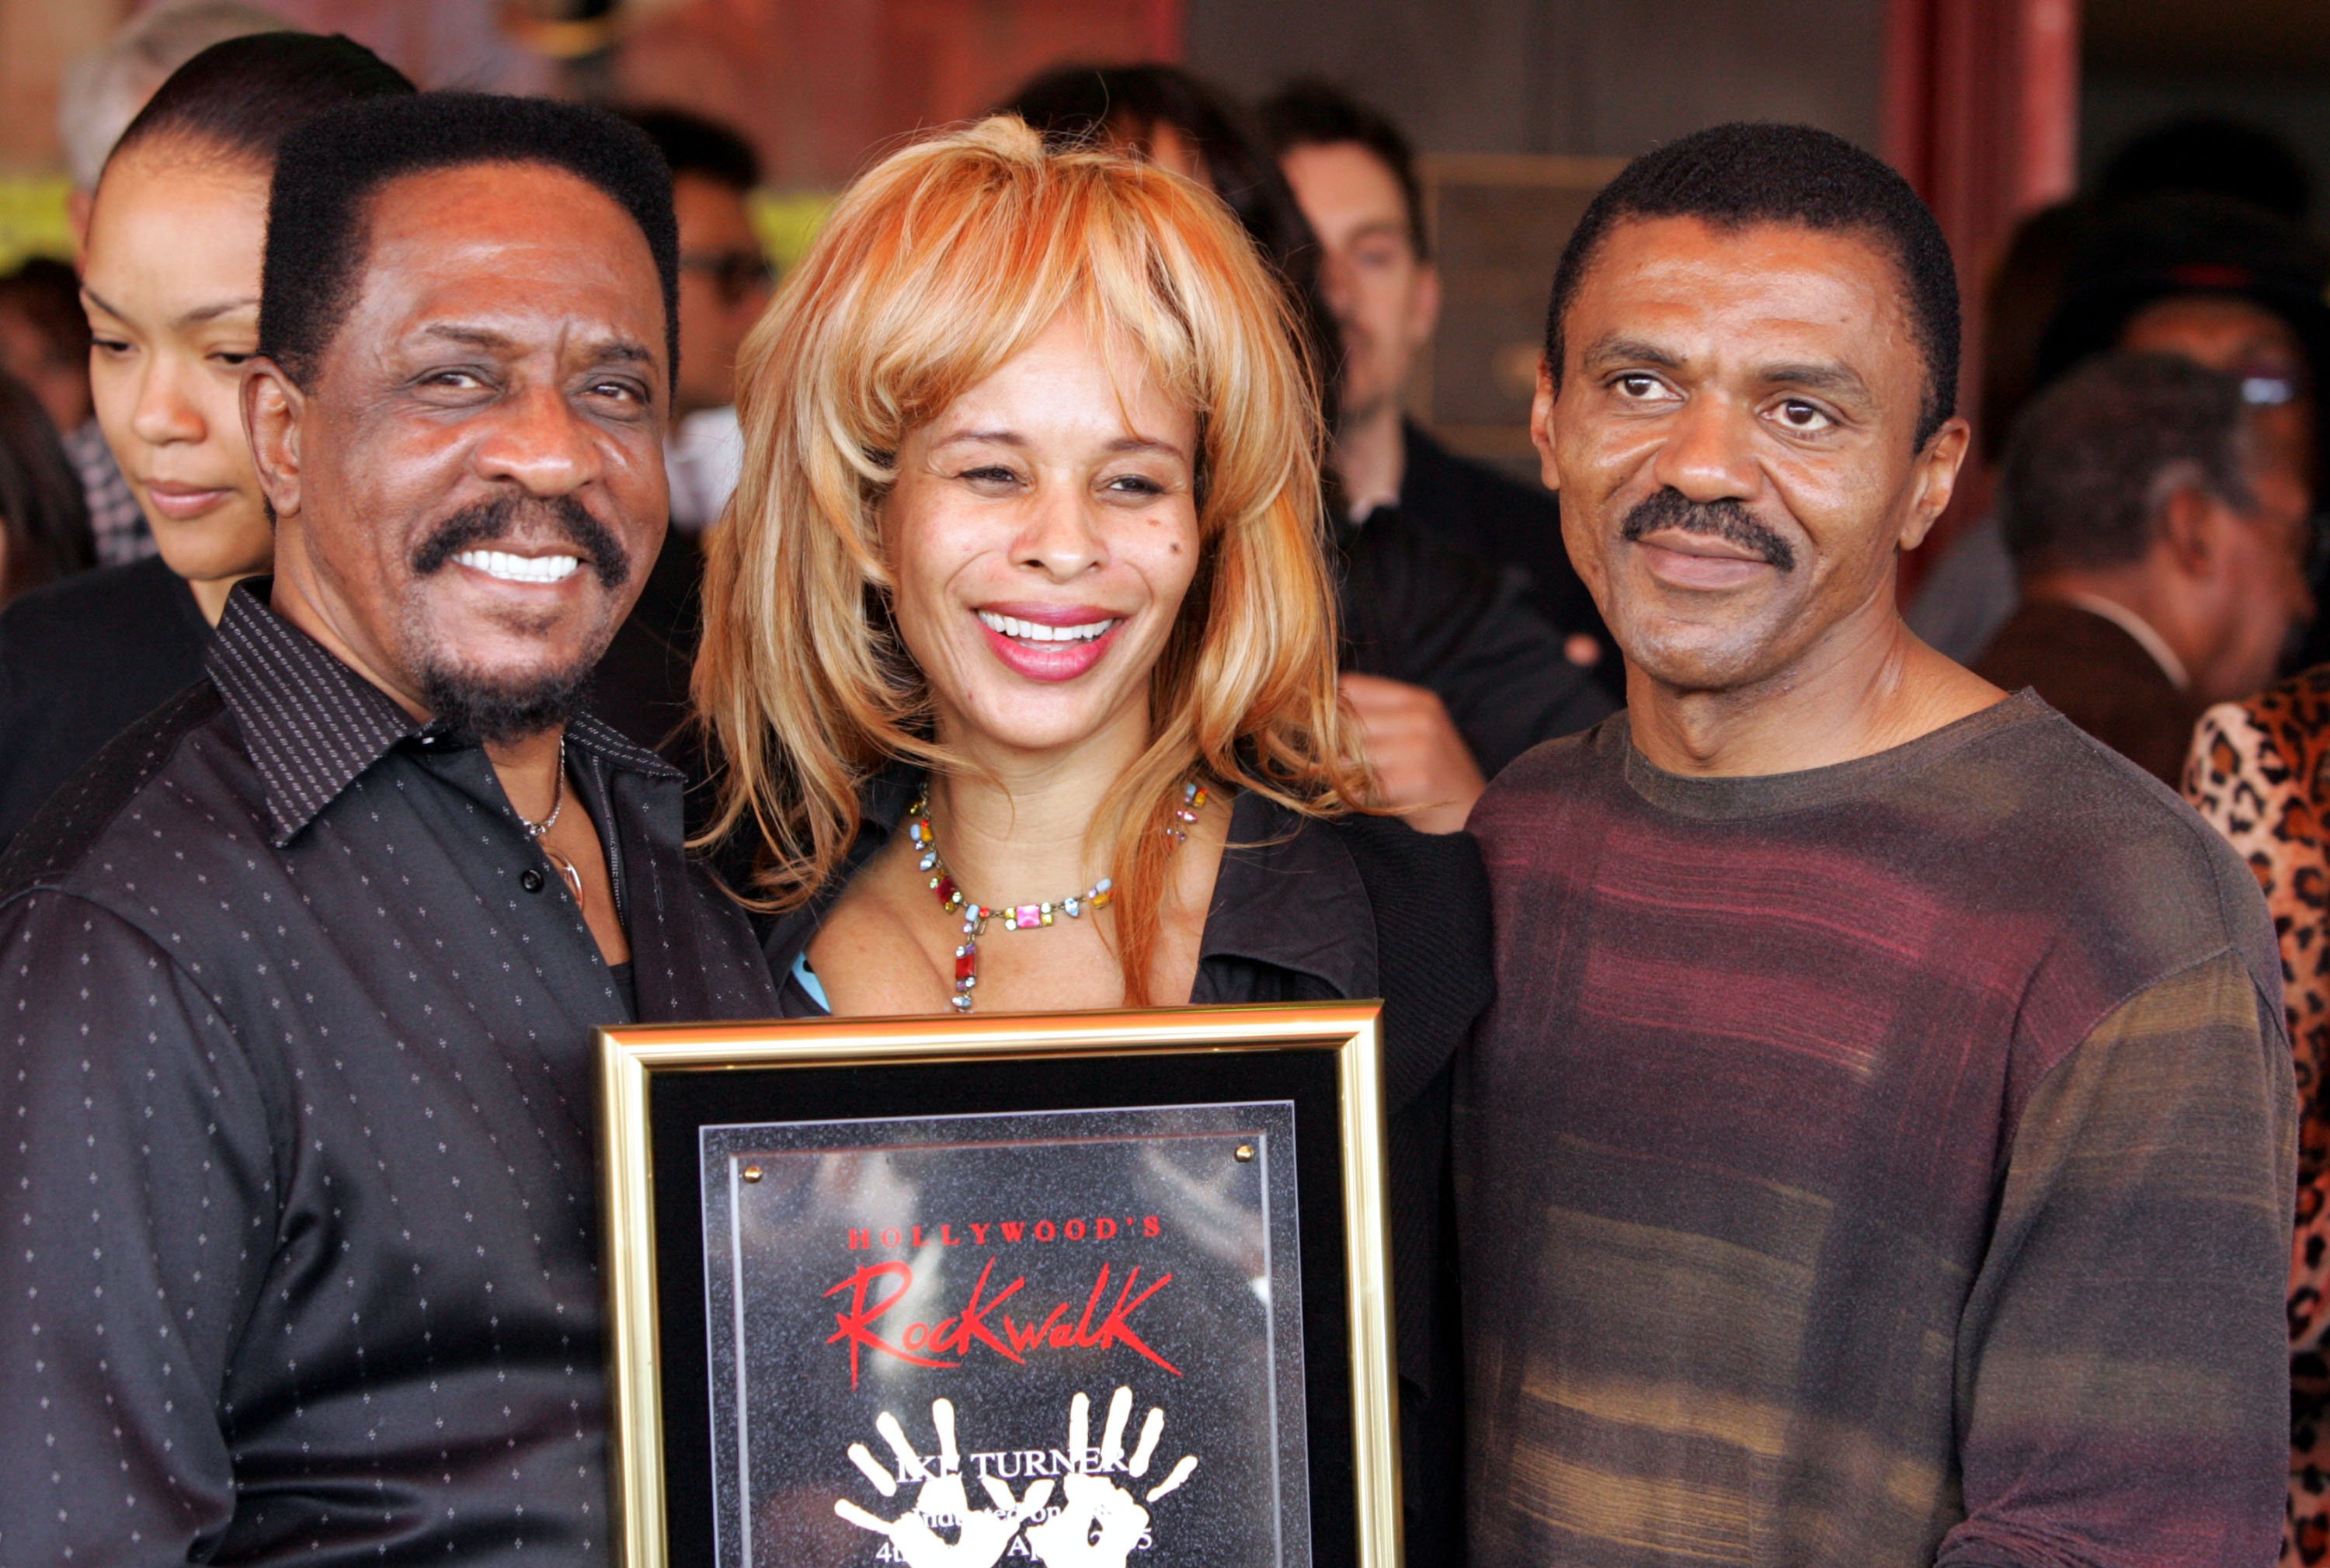 Ike Turner, Audrey Madison, and Ike Turner Jr. at Ike's induction into the Hollywood Rockwalk in Hollywood, California, on April 4, 2005. | Source: Getty Images